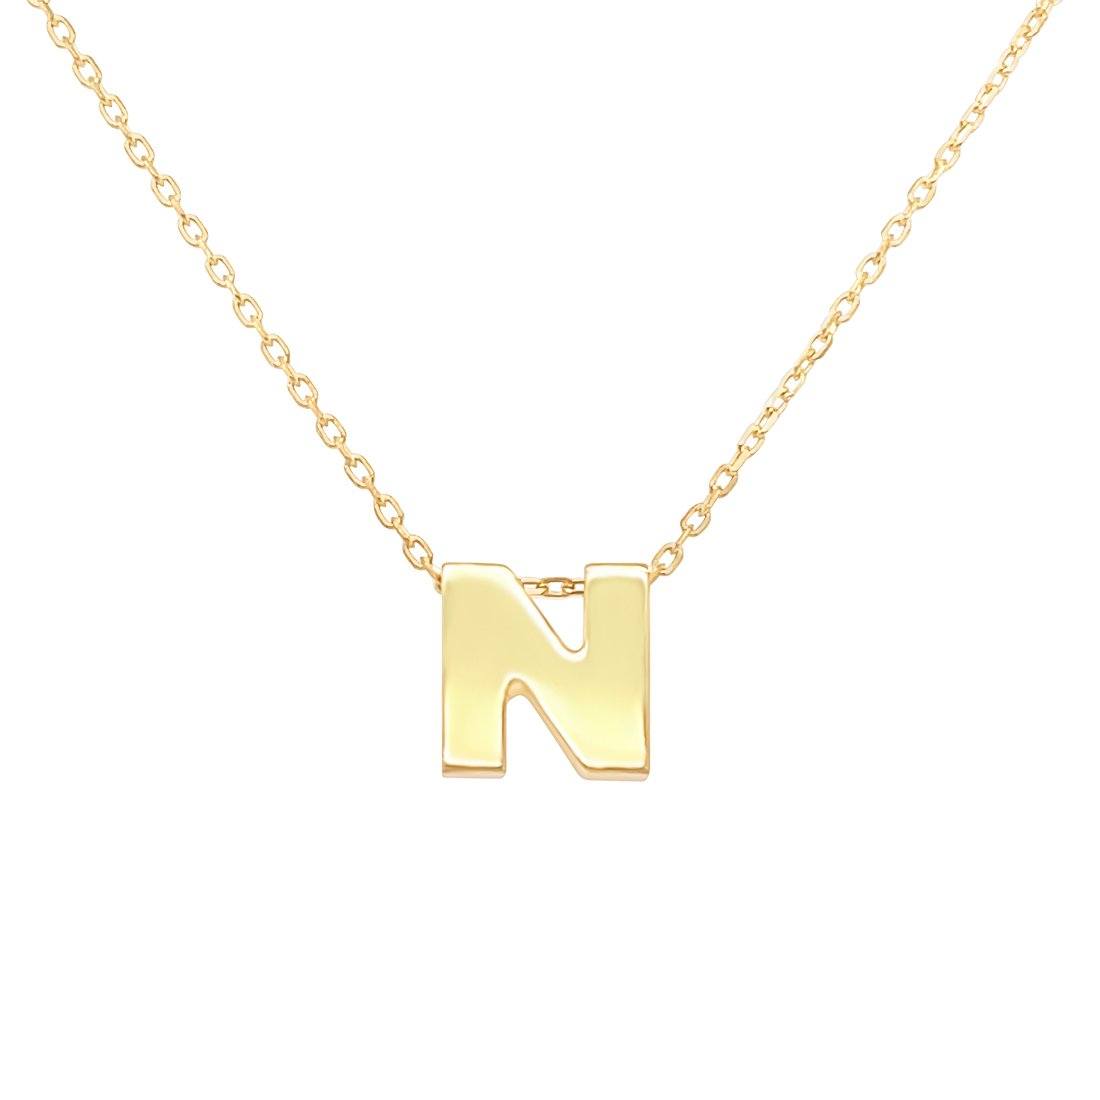 9ct Yellow Gold Silver Infused Initial Pendant Necklace Necklaces Bevilles N 